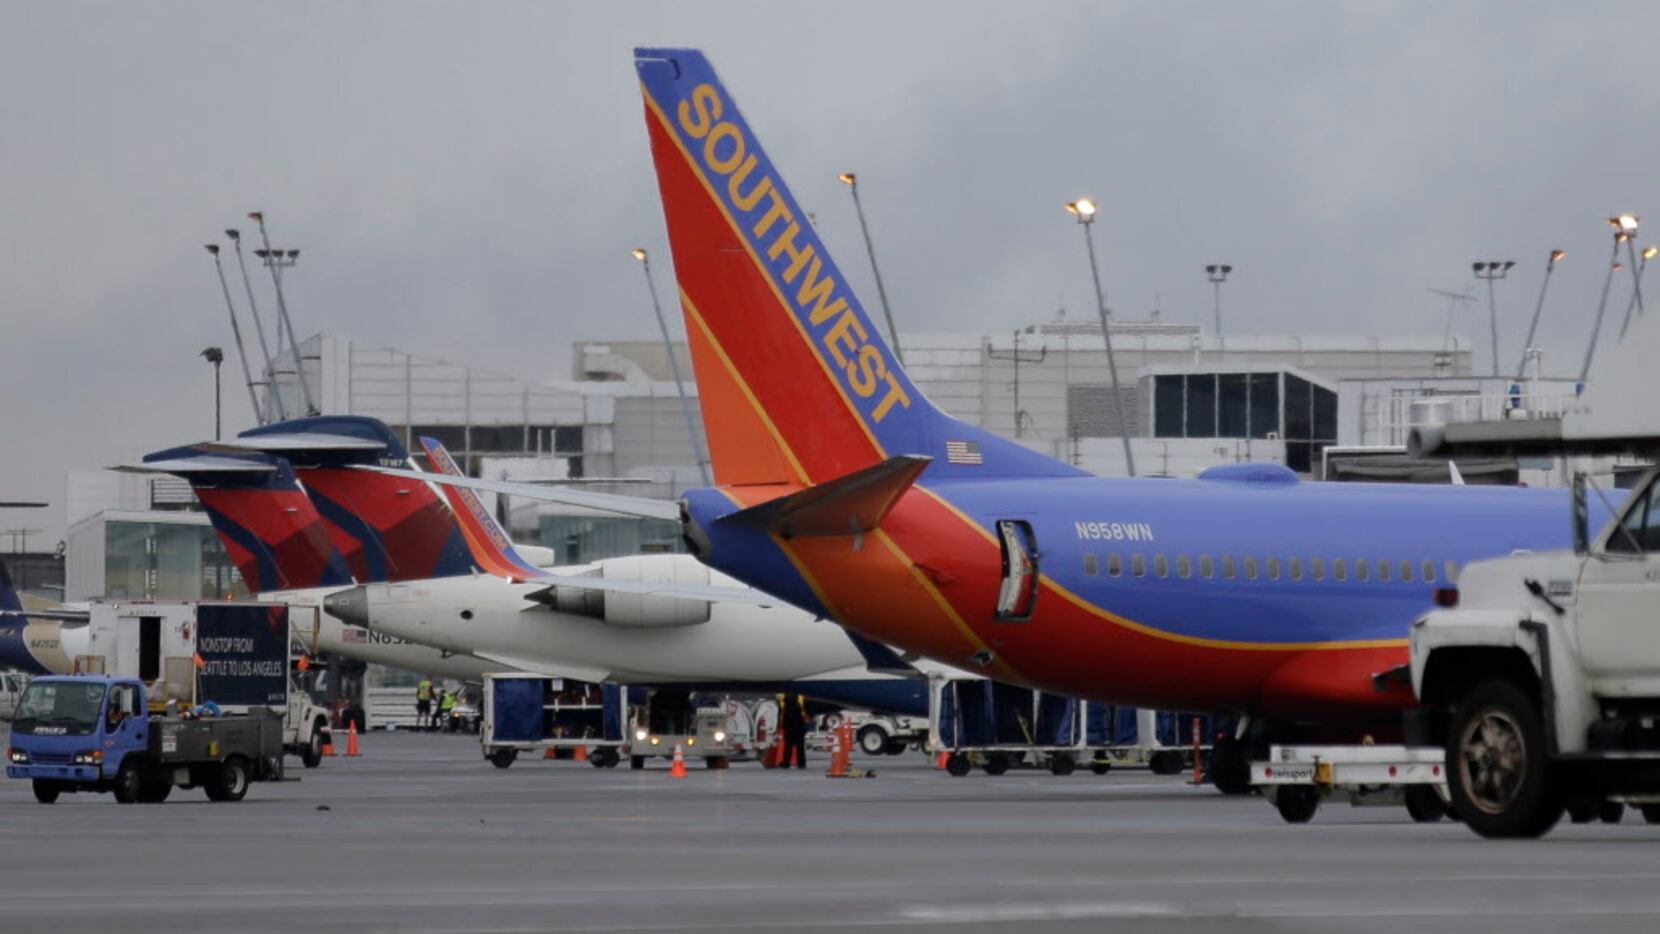 Planes belonging to Southwest Airlines, right, and Delta Air Lines, left, are parked at...